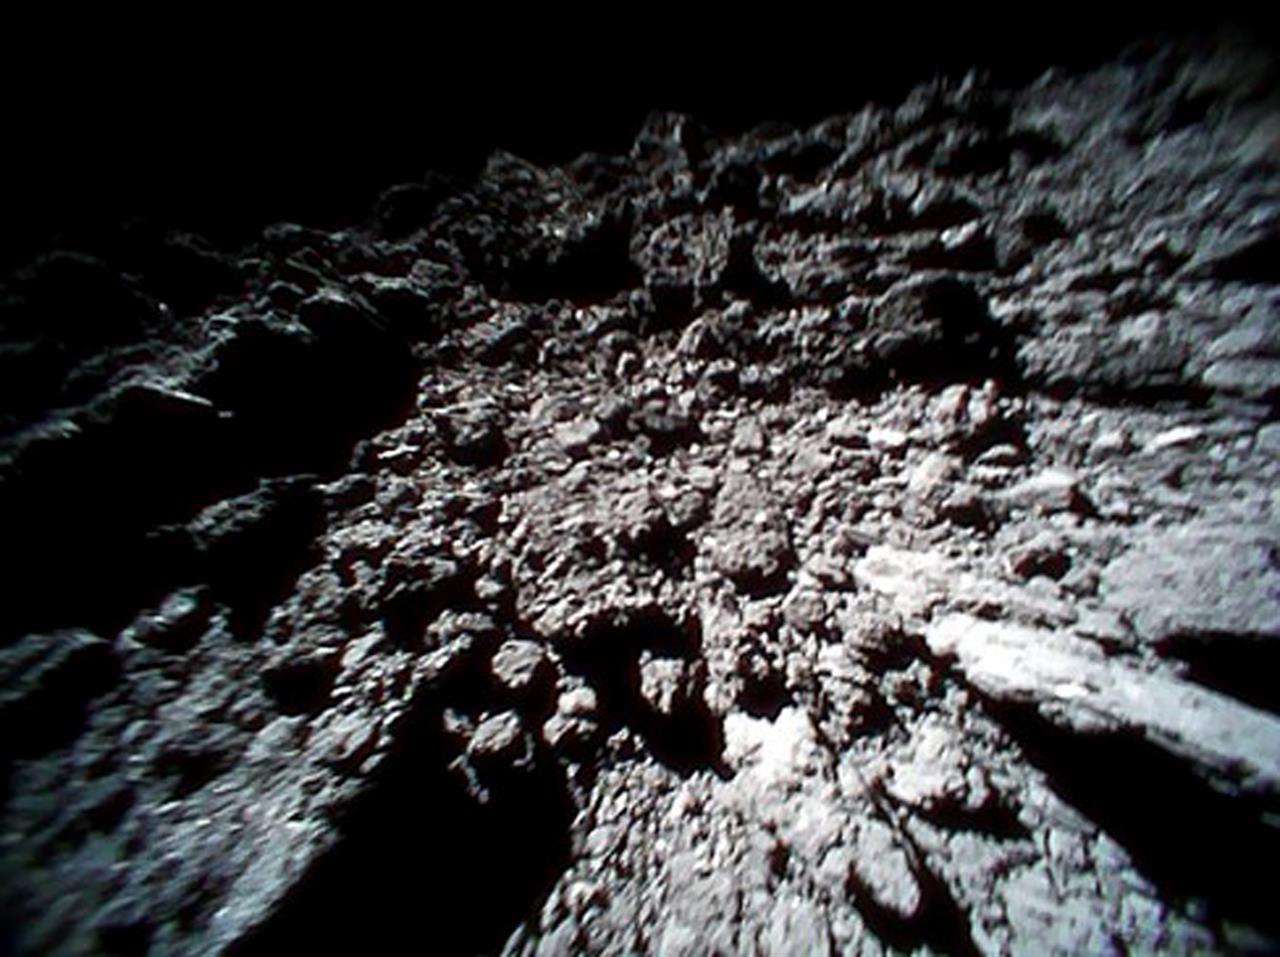 Photos from Japanese space rovers show asteroid is ... rocky | Money 105.5 FM ...